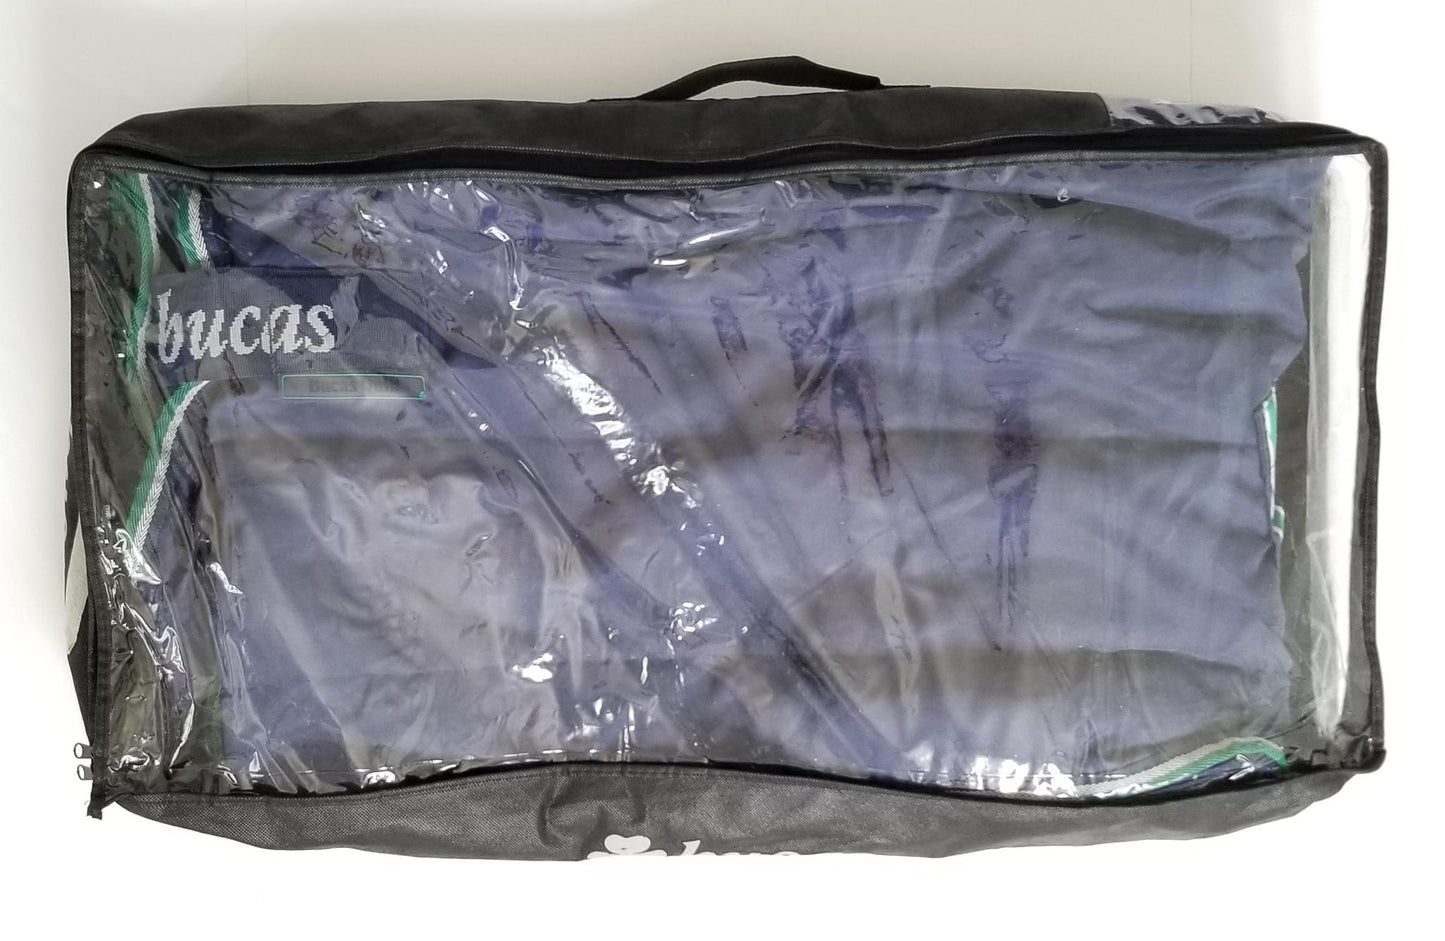 Bucas Stay-Dry Quilt 150g - Navy - 72"